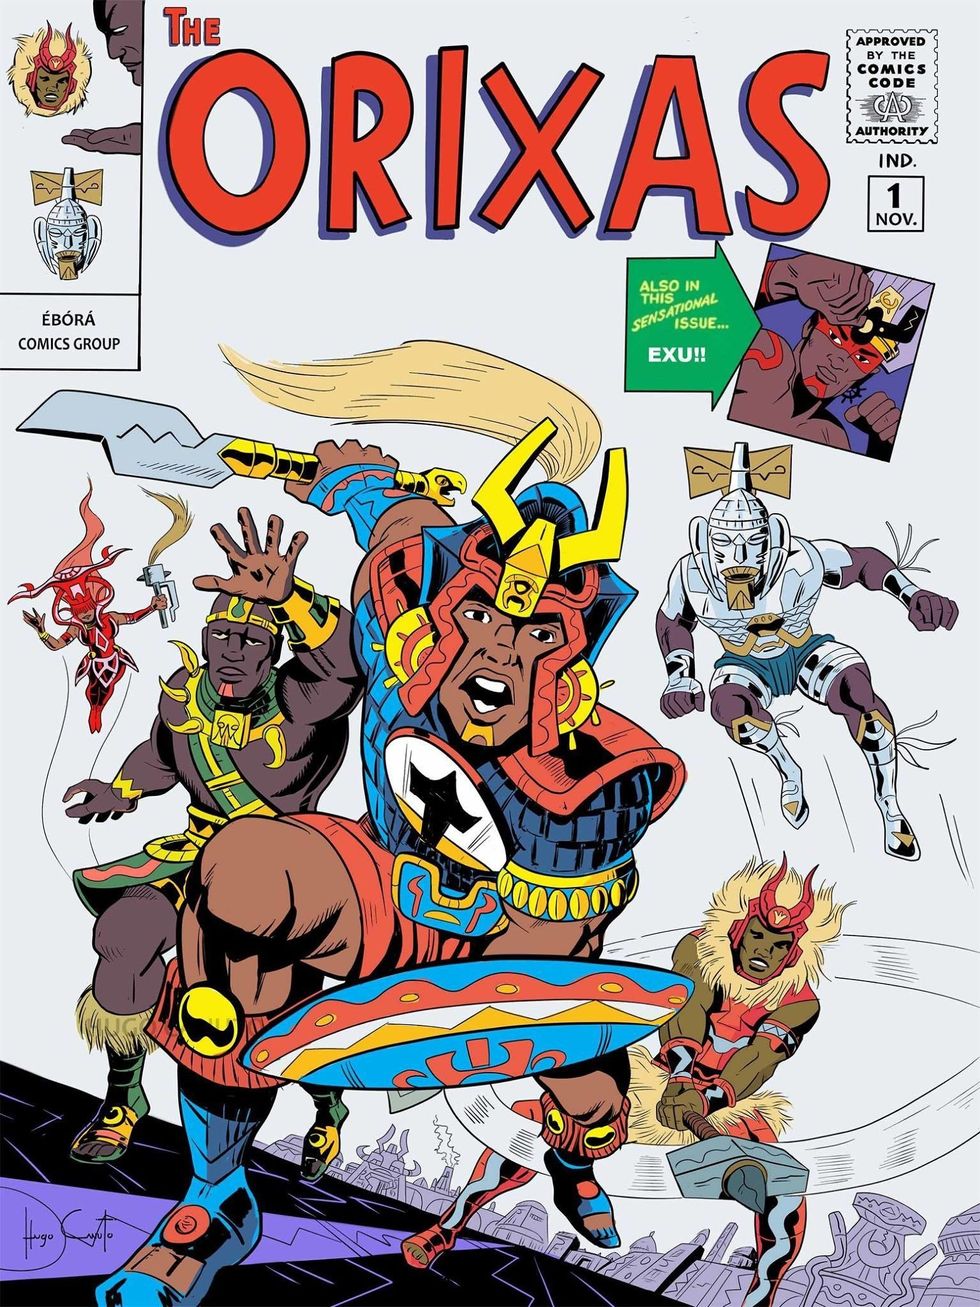 You Need To See the Stunning Covers of This Afro-Brazilian Comic Series Inspired by the Orishas